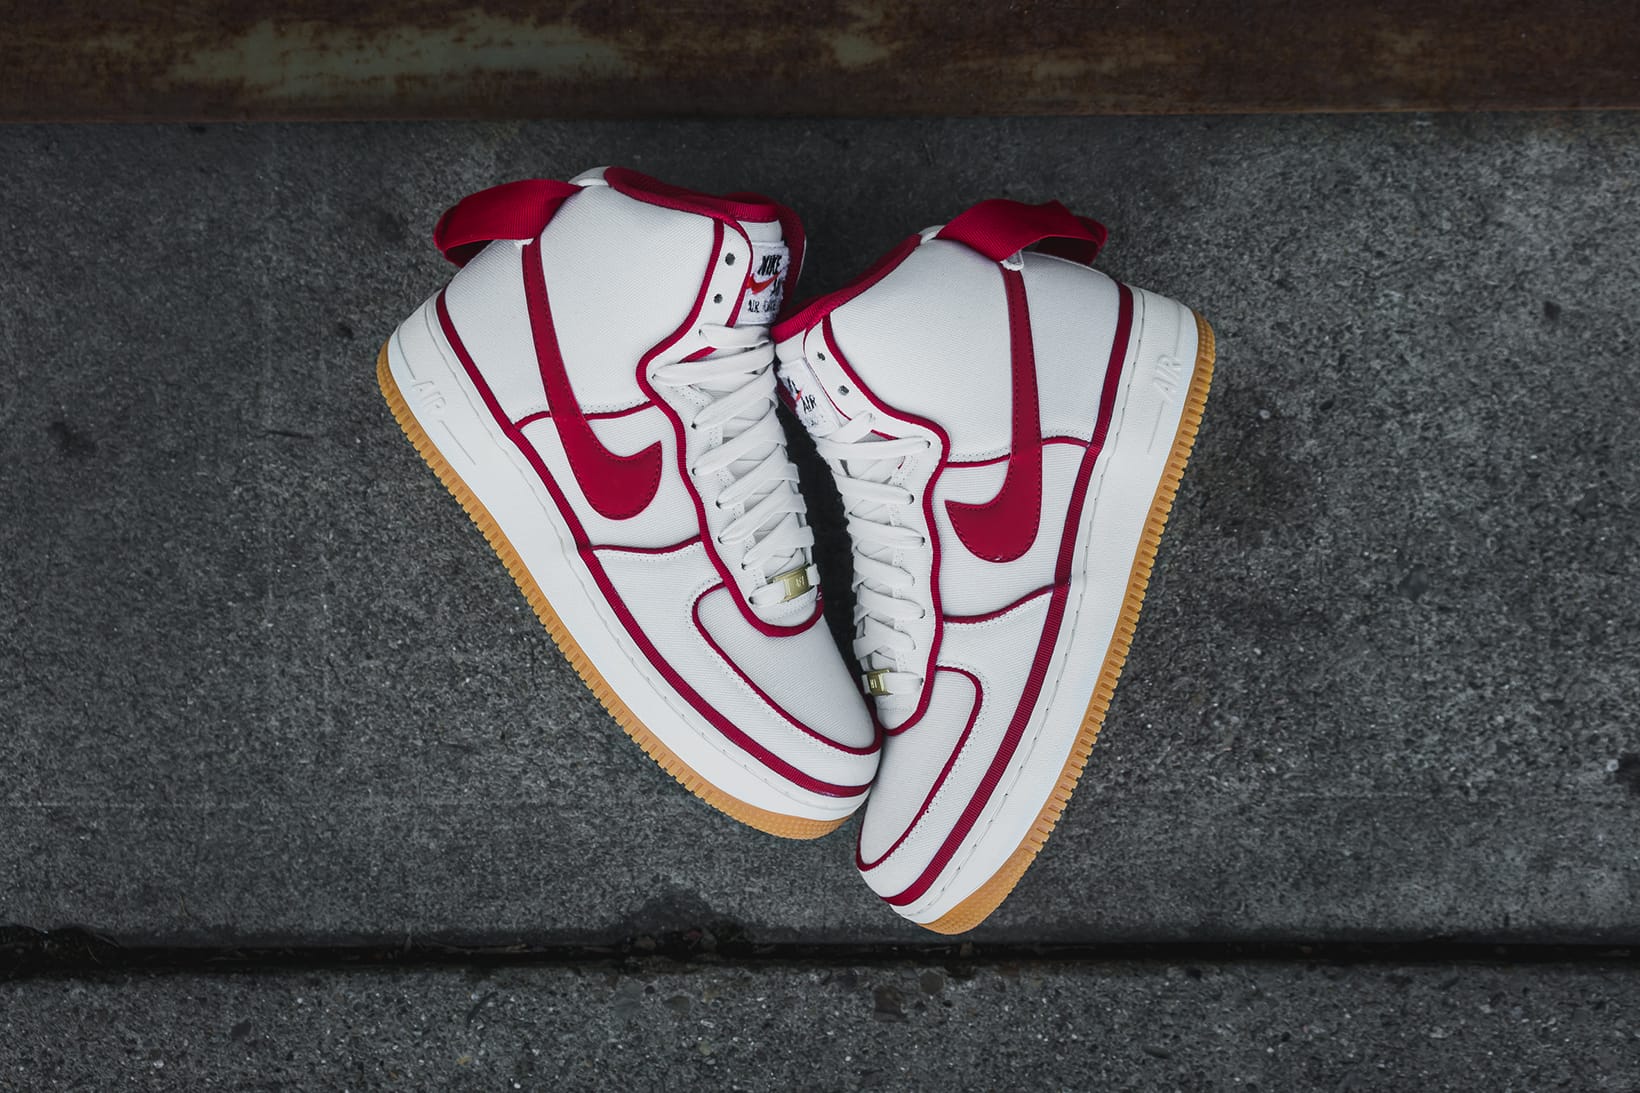 Nike Air Force 1 High '07 LV8 in Sail/Gym Red/Black | HYPEBEAST